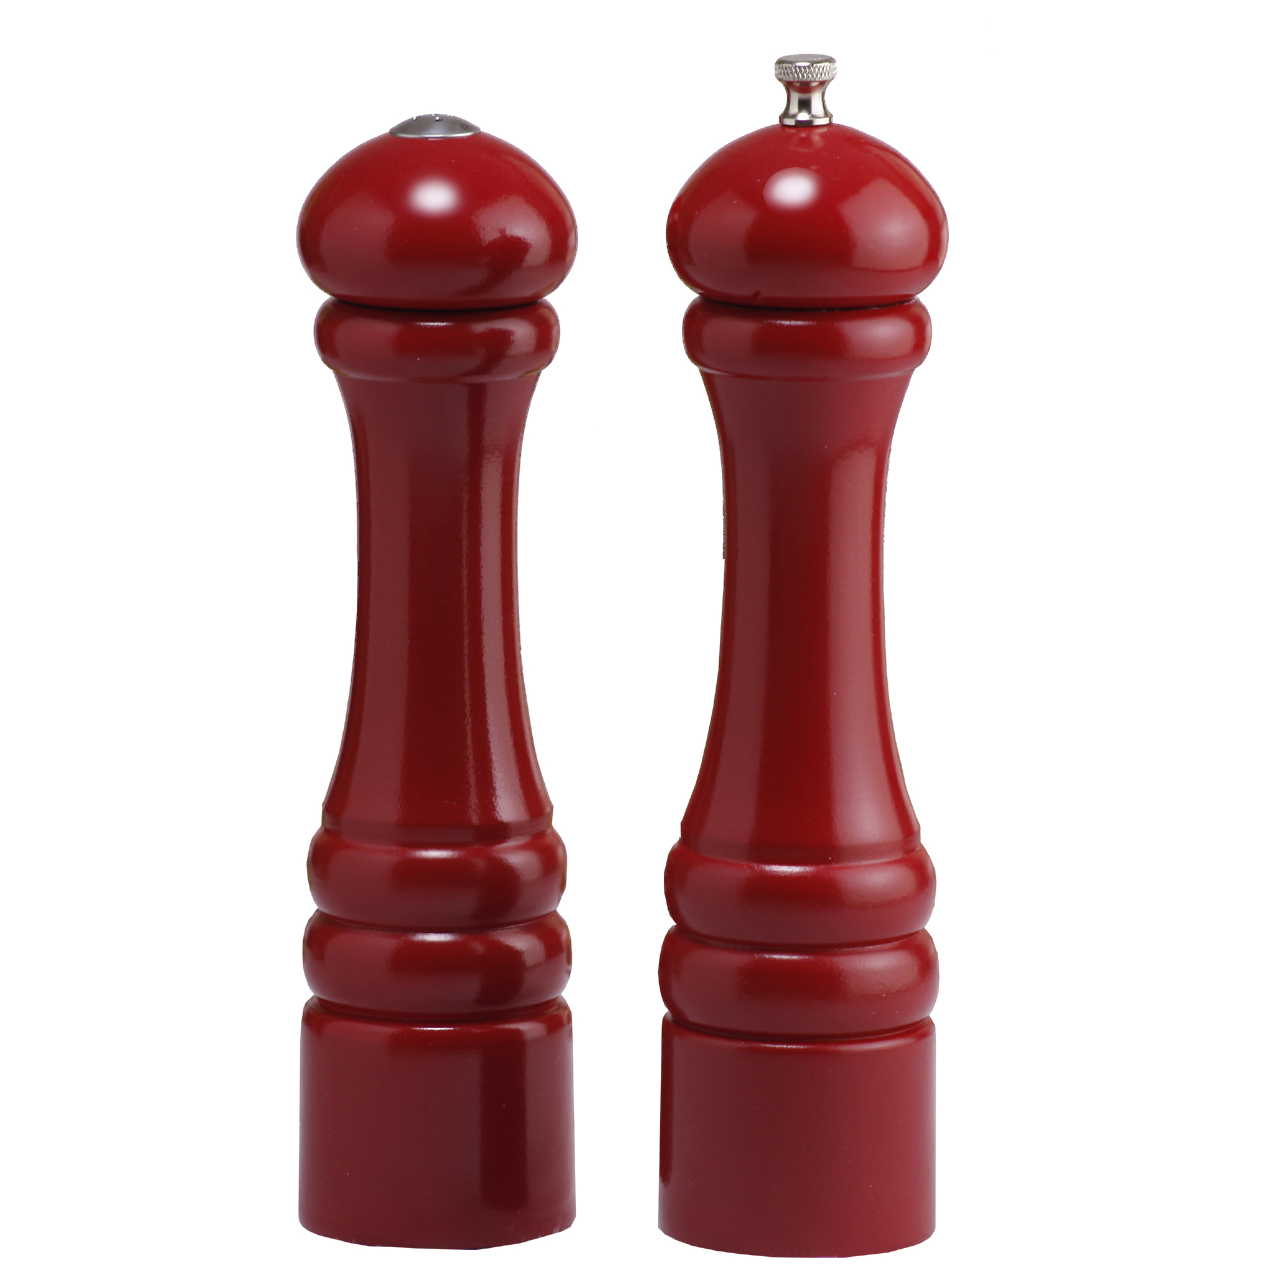 - 10600 - Autumn Hues - 10 Inch - Pepper Mill And Salt Shaker Set - Candy Apple